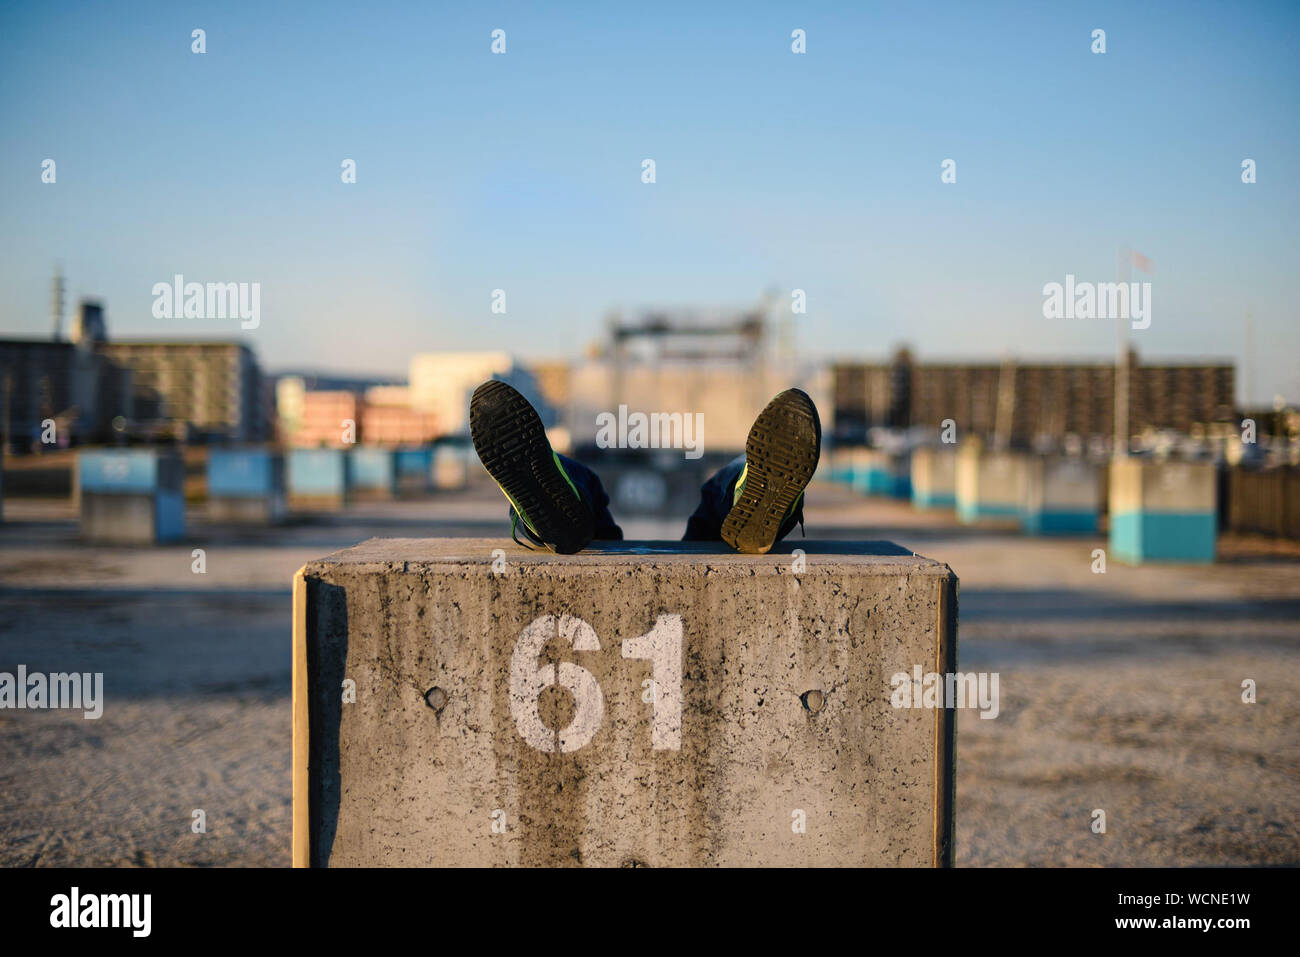 Person With Feet Up On Concrete Block At Commercial Dock Stock Photo